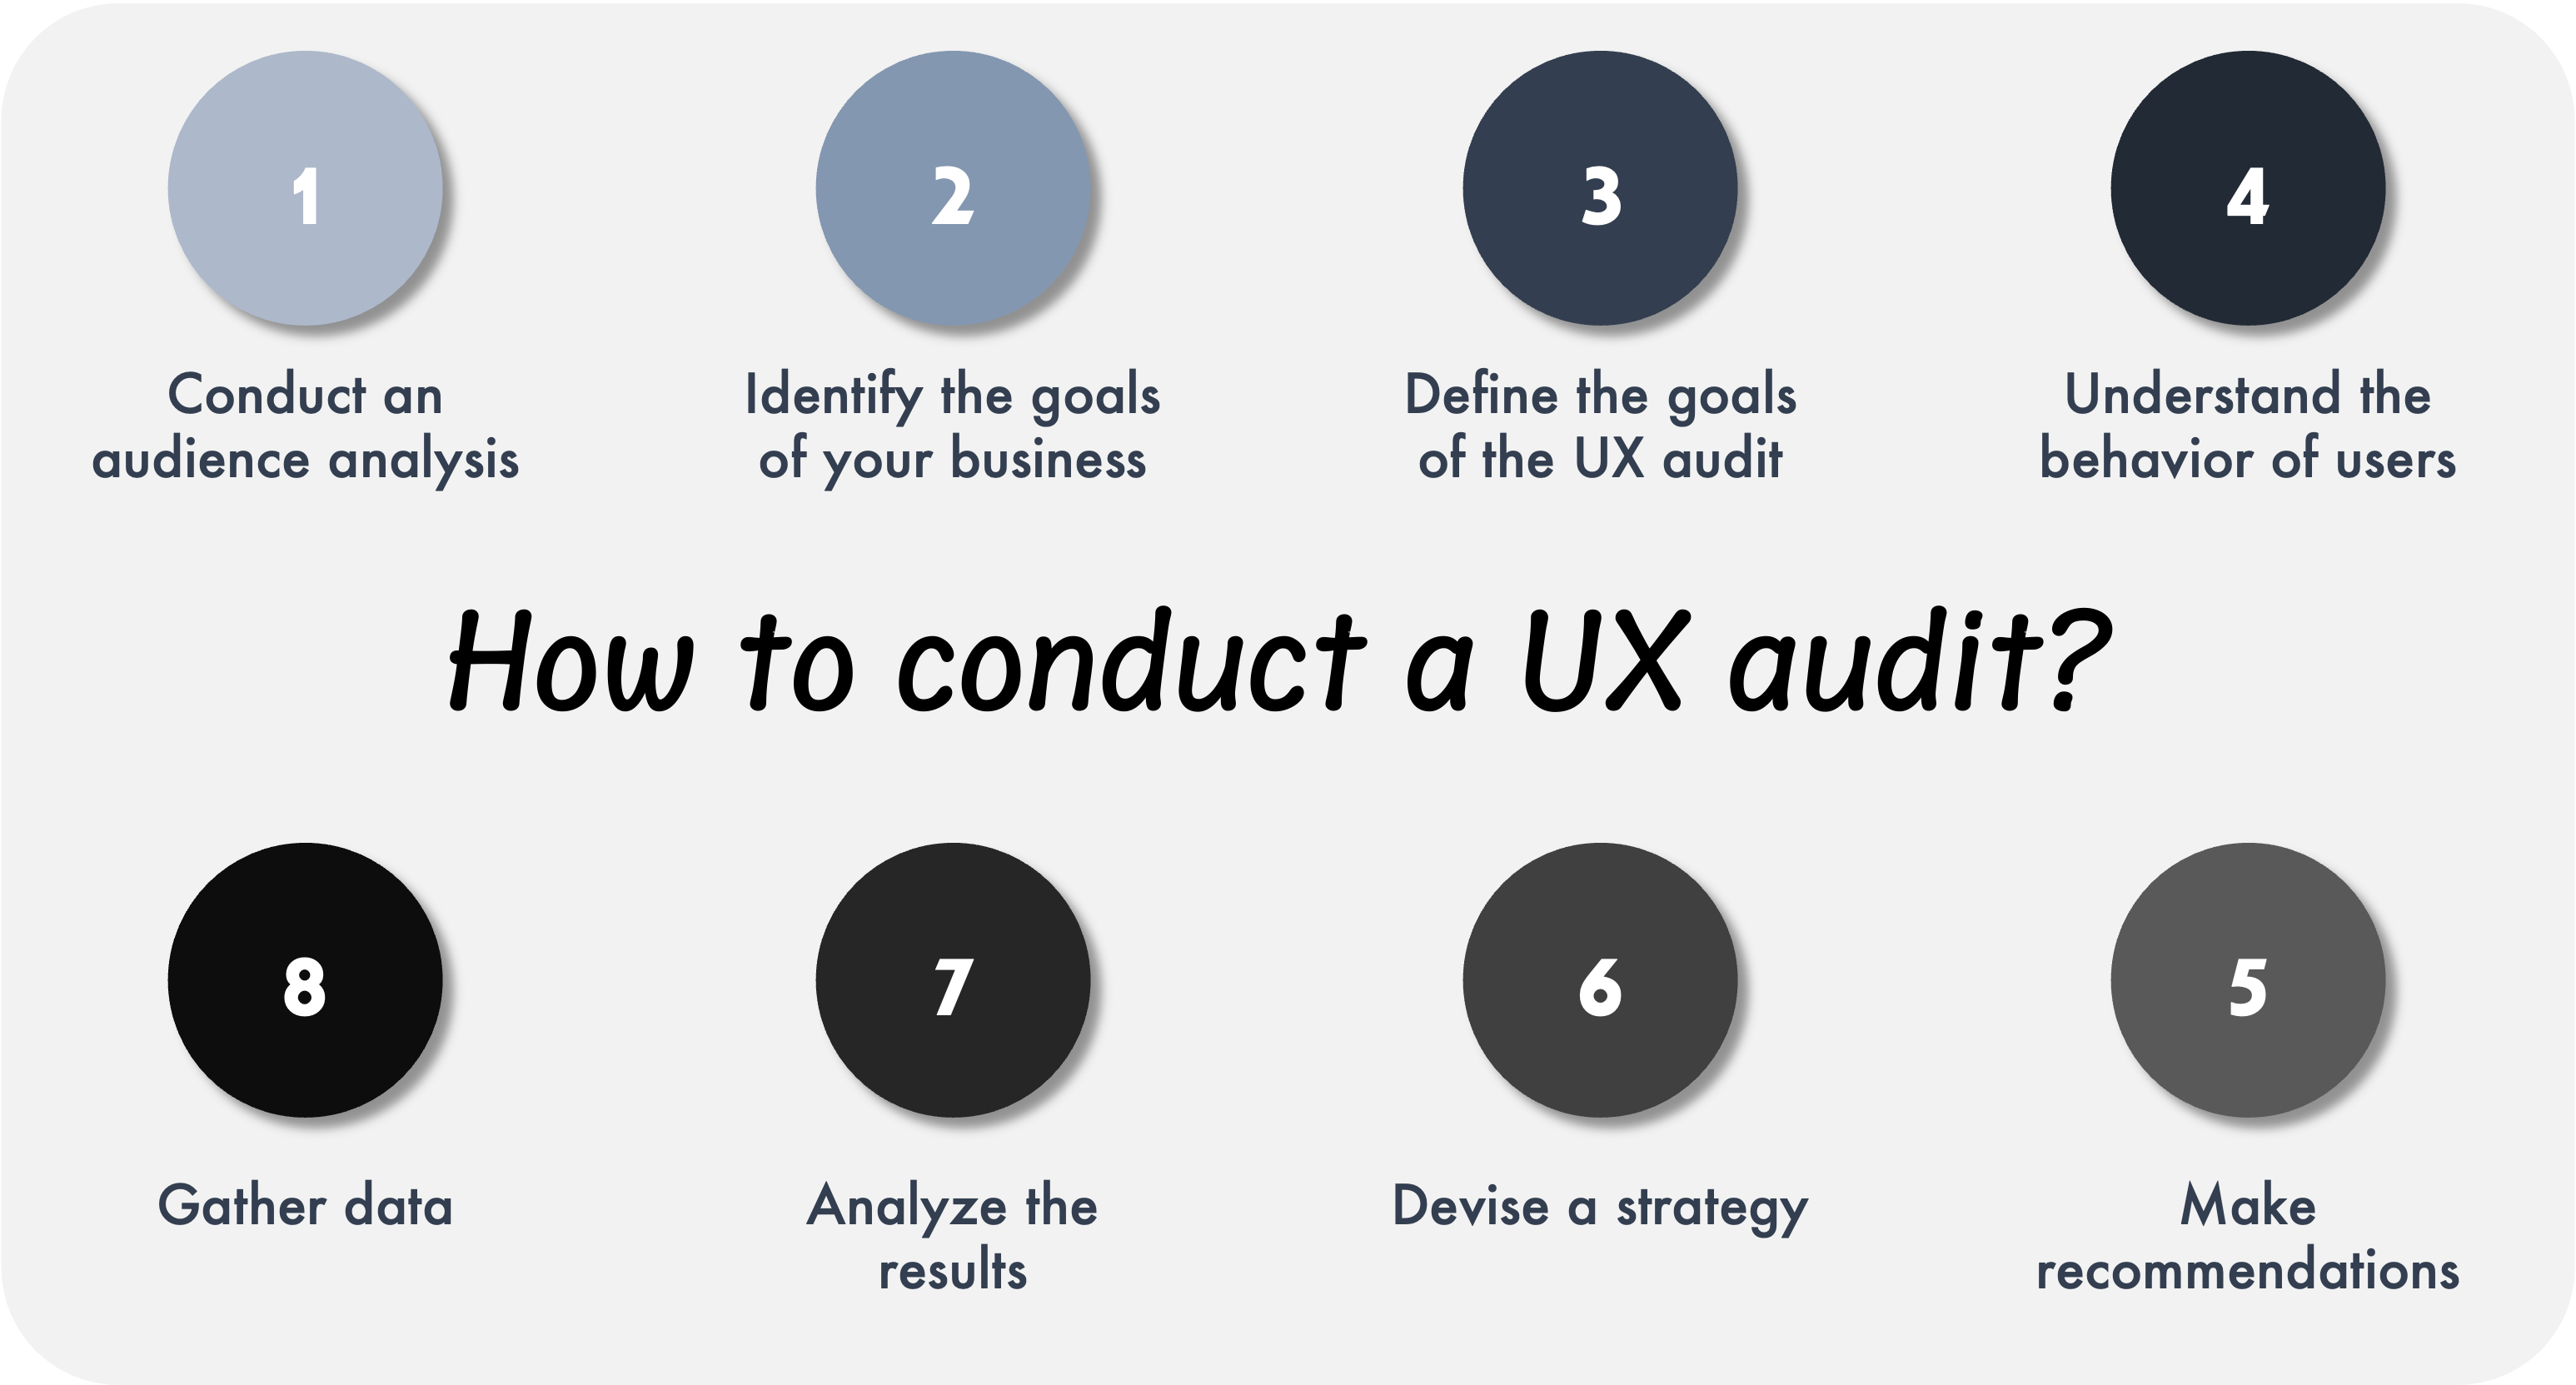 How to Conduct a UX Audit